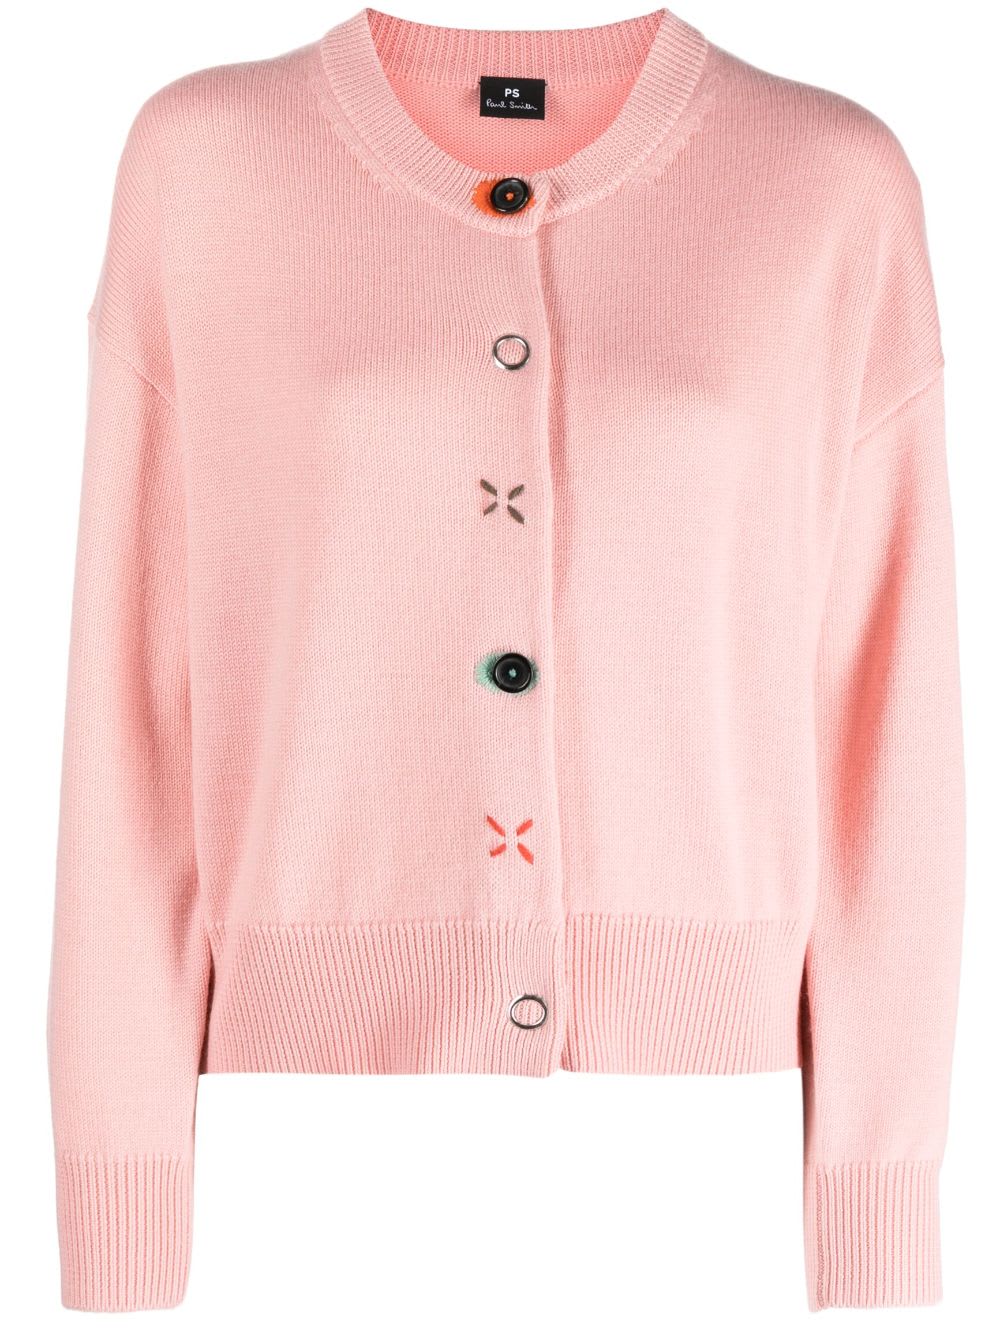 PS BY PAUL SMITH CREW NECK CARDIGAN